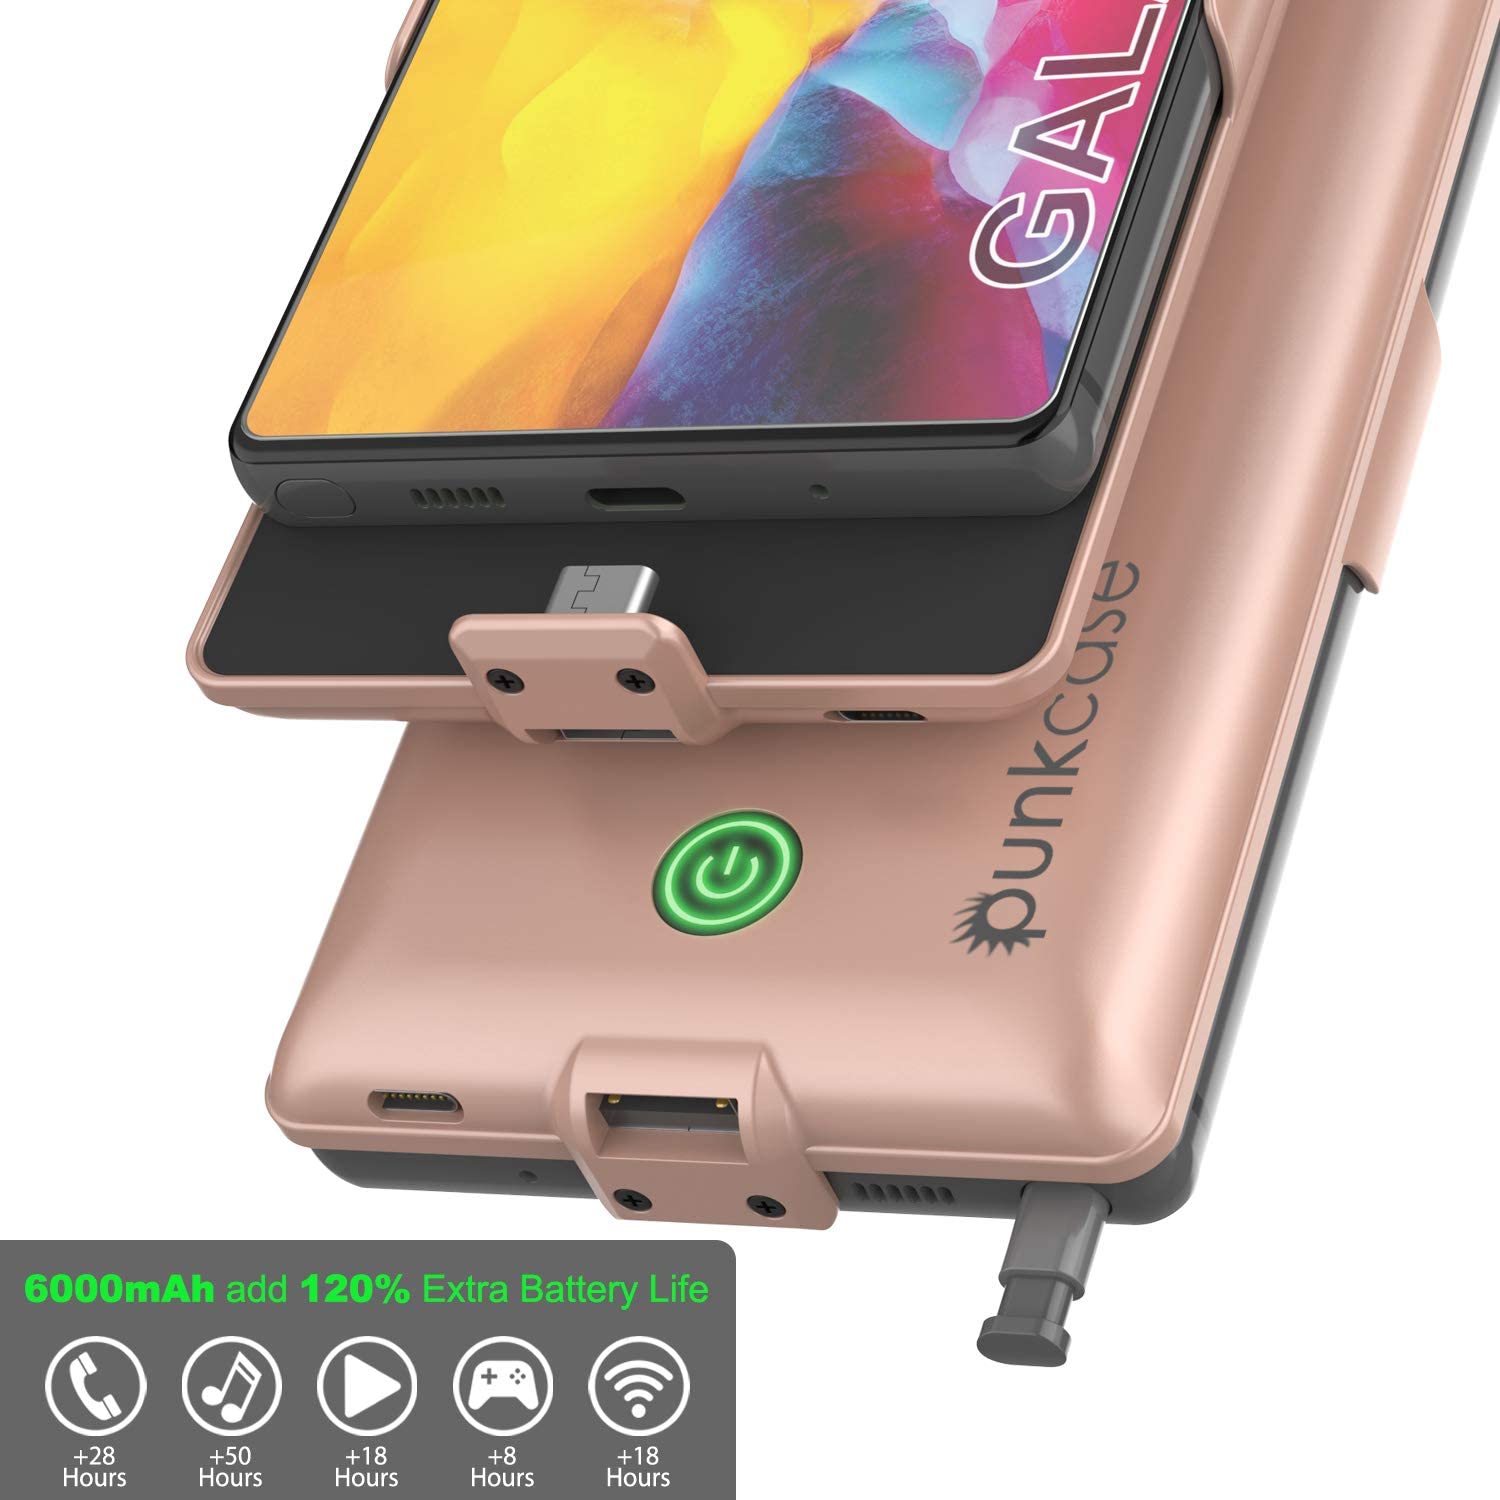 Galaxy Note 20 6000mAH Battery Charger PunkJuice 2.0 Slim Case [Rose-Gold]